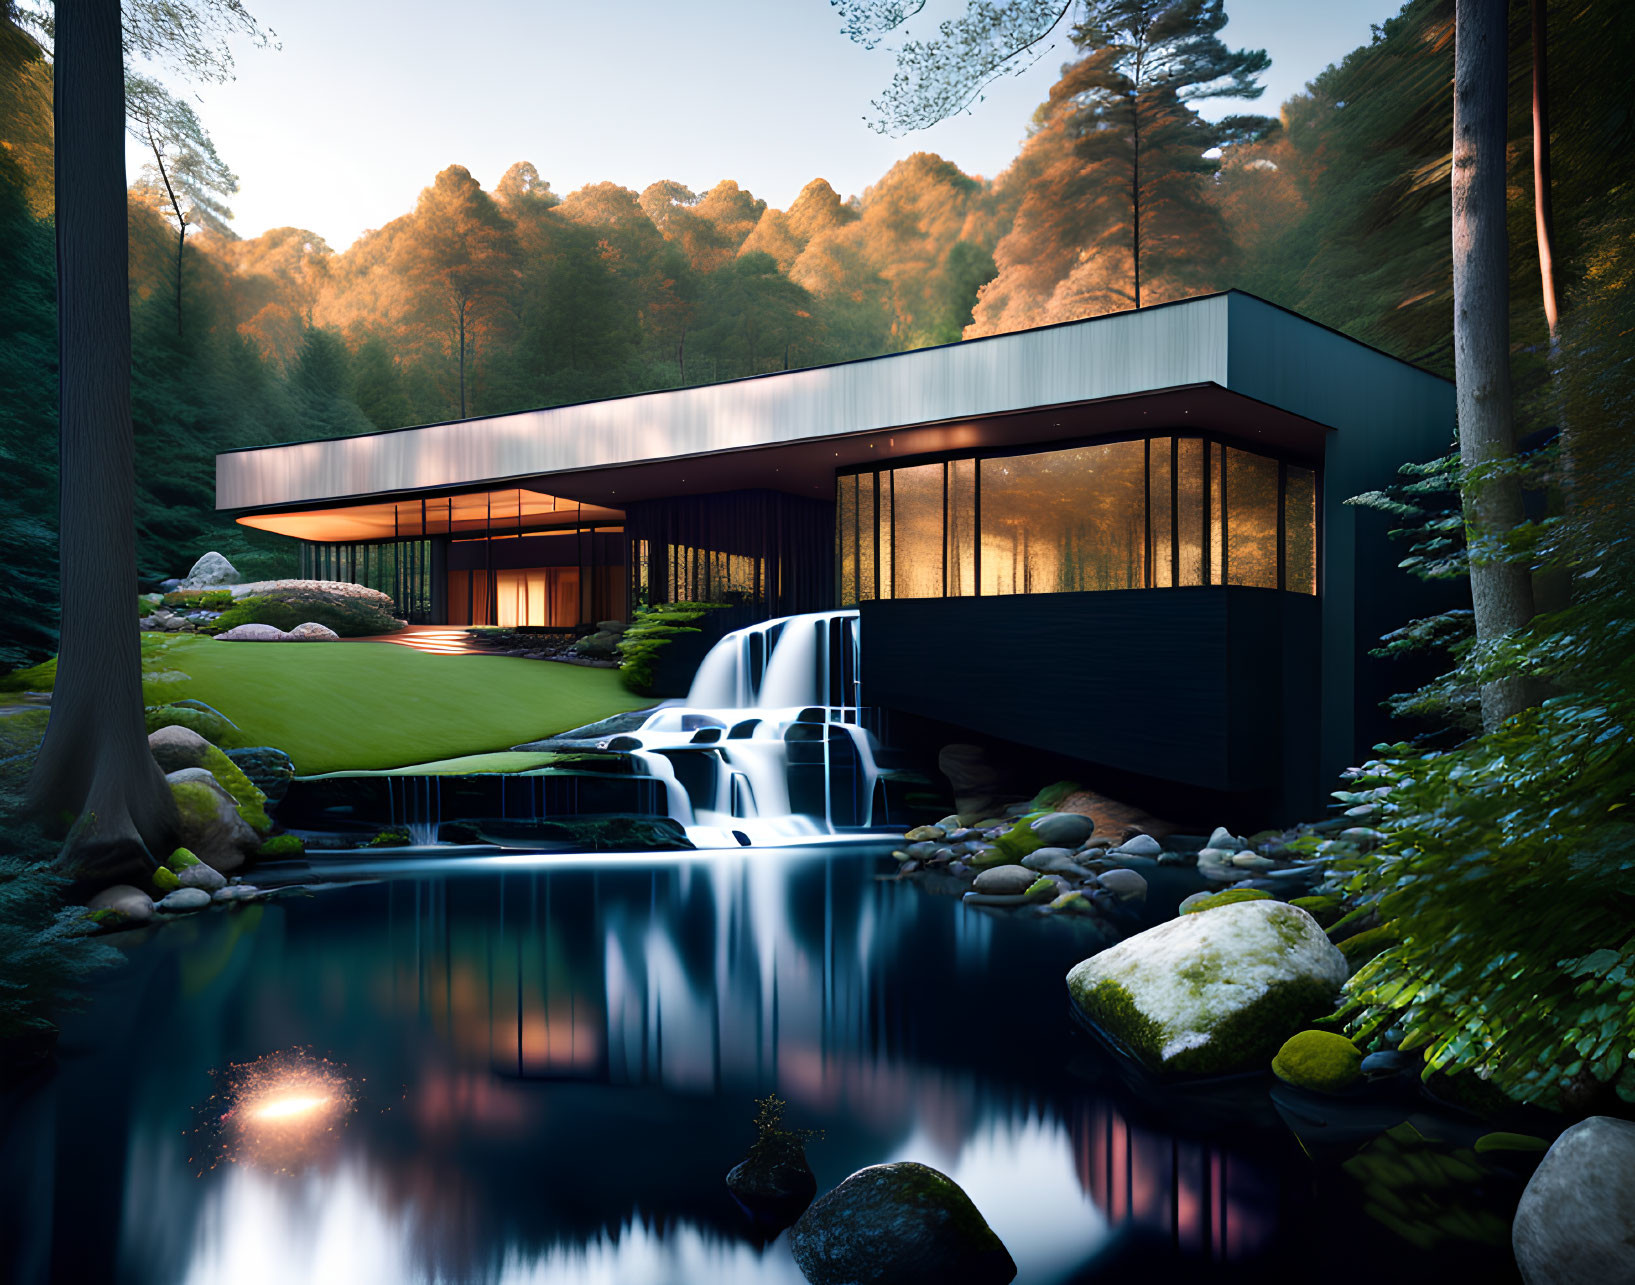 Contemporary house next to waterfall in forest setting